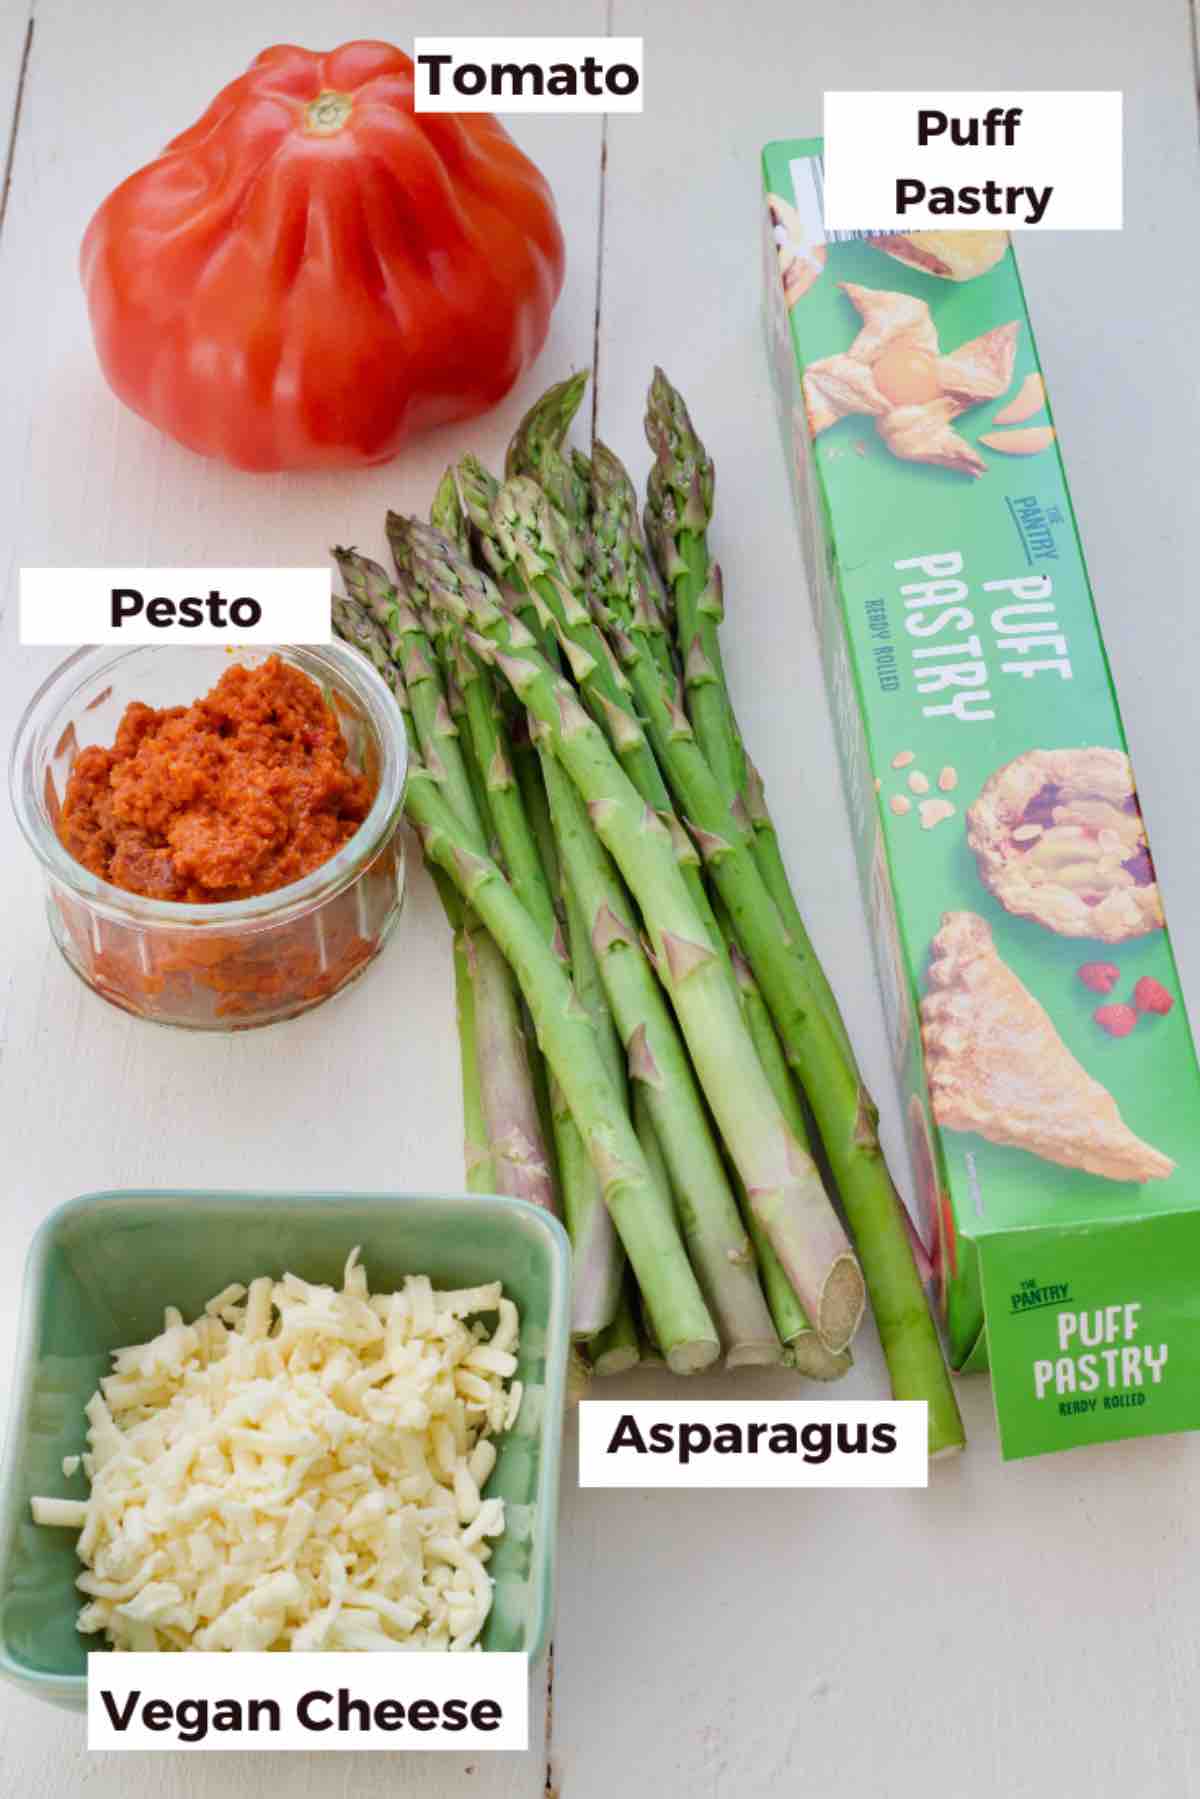 Ingredients for making tomato and asparagus puff pastry bundles.